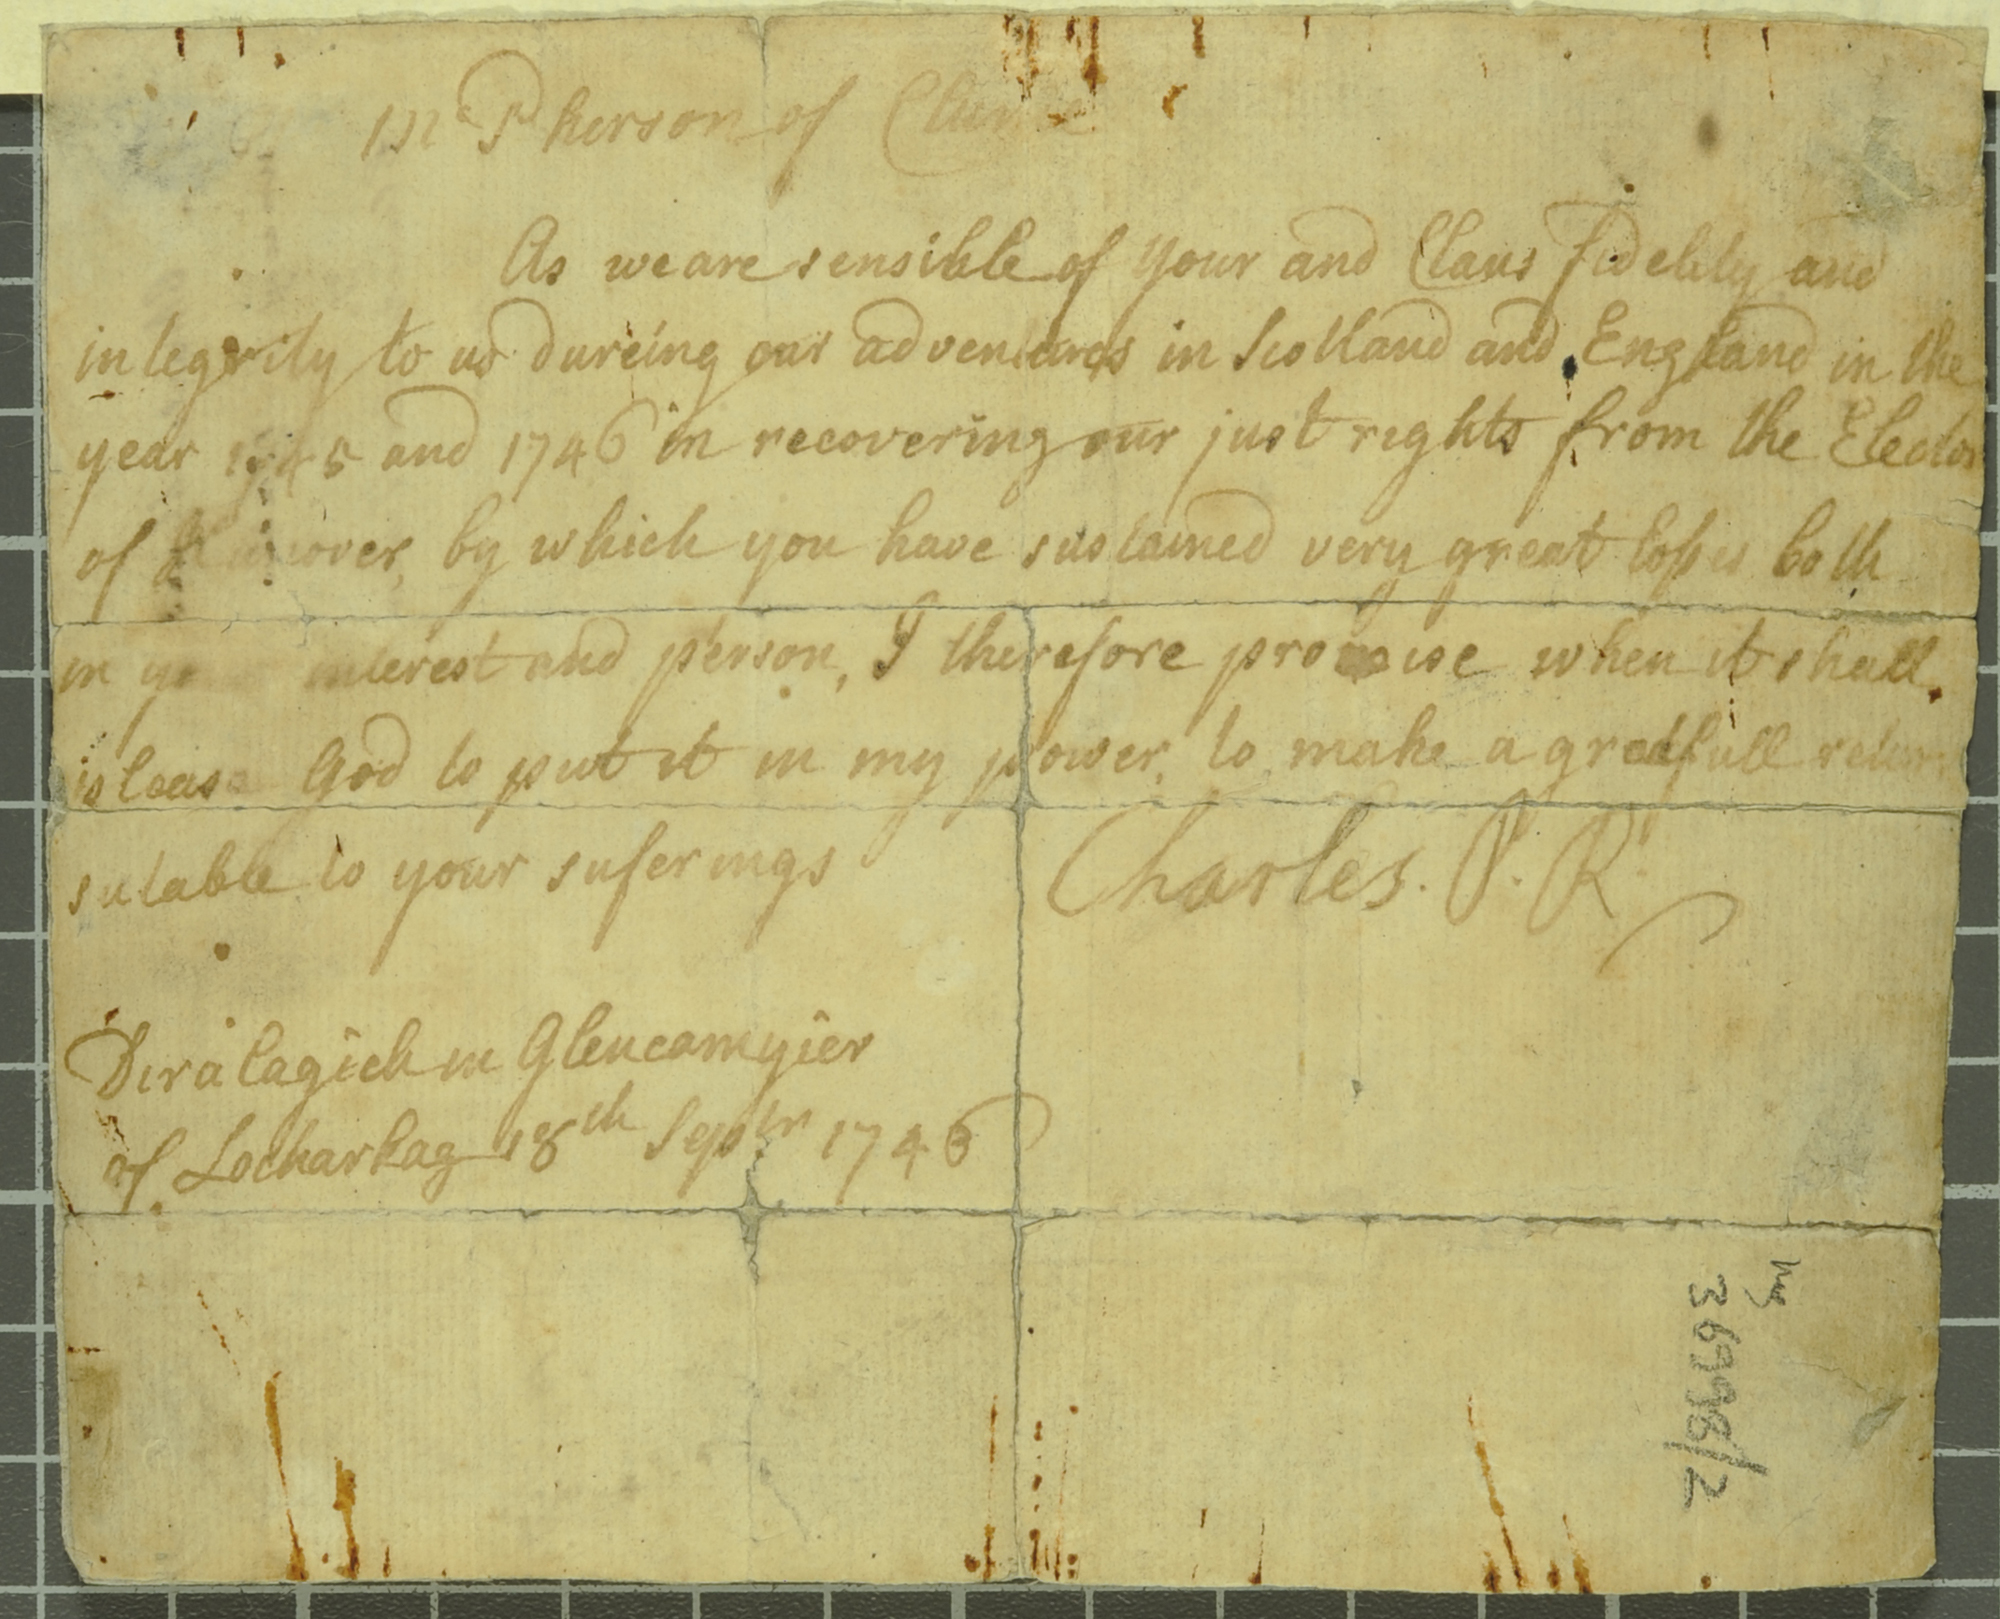 Forged note from Charles Edward Stuart, the Young Pretender, to Euan McPherson of Clunie, 18 September 1746 (St Andrews ms36998/2)